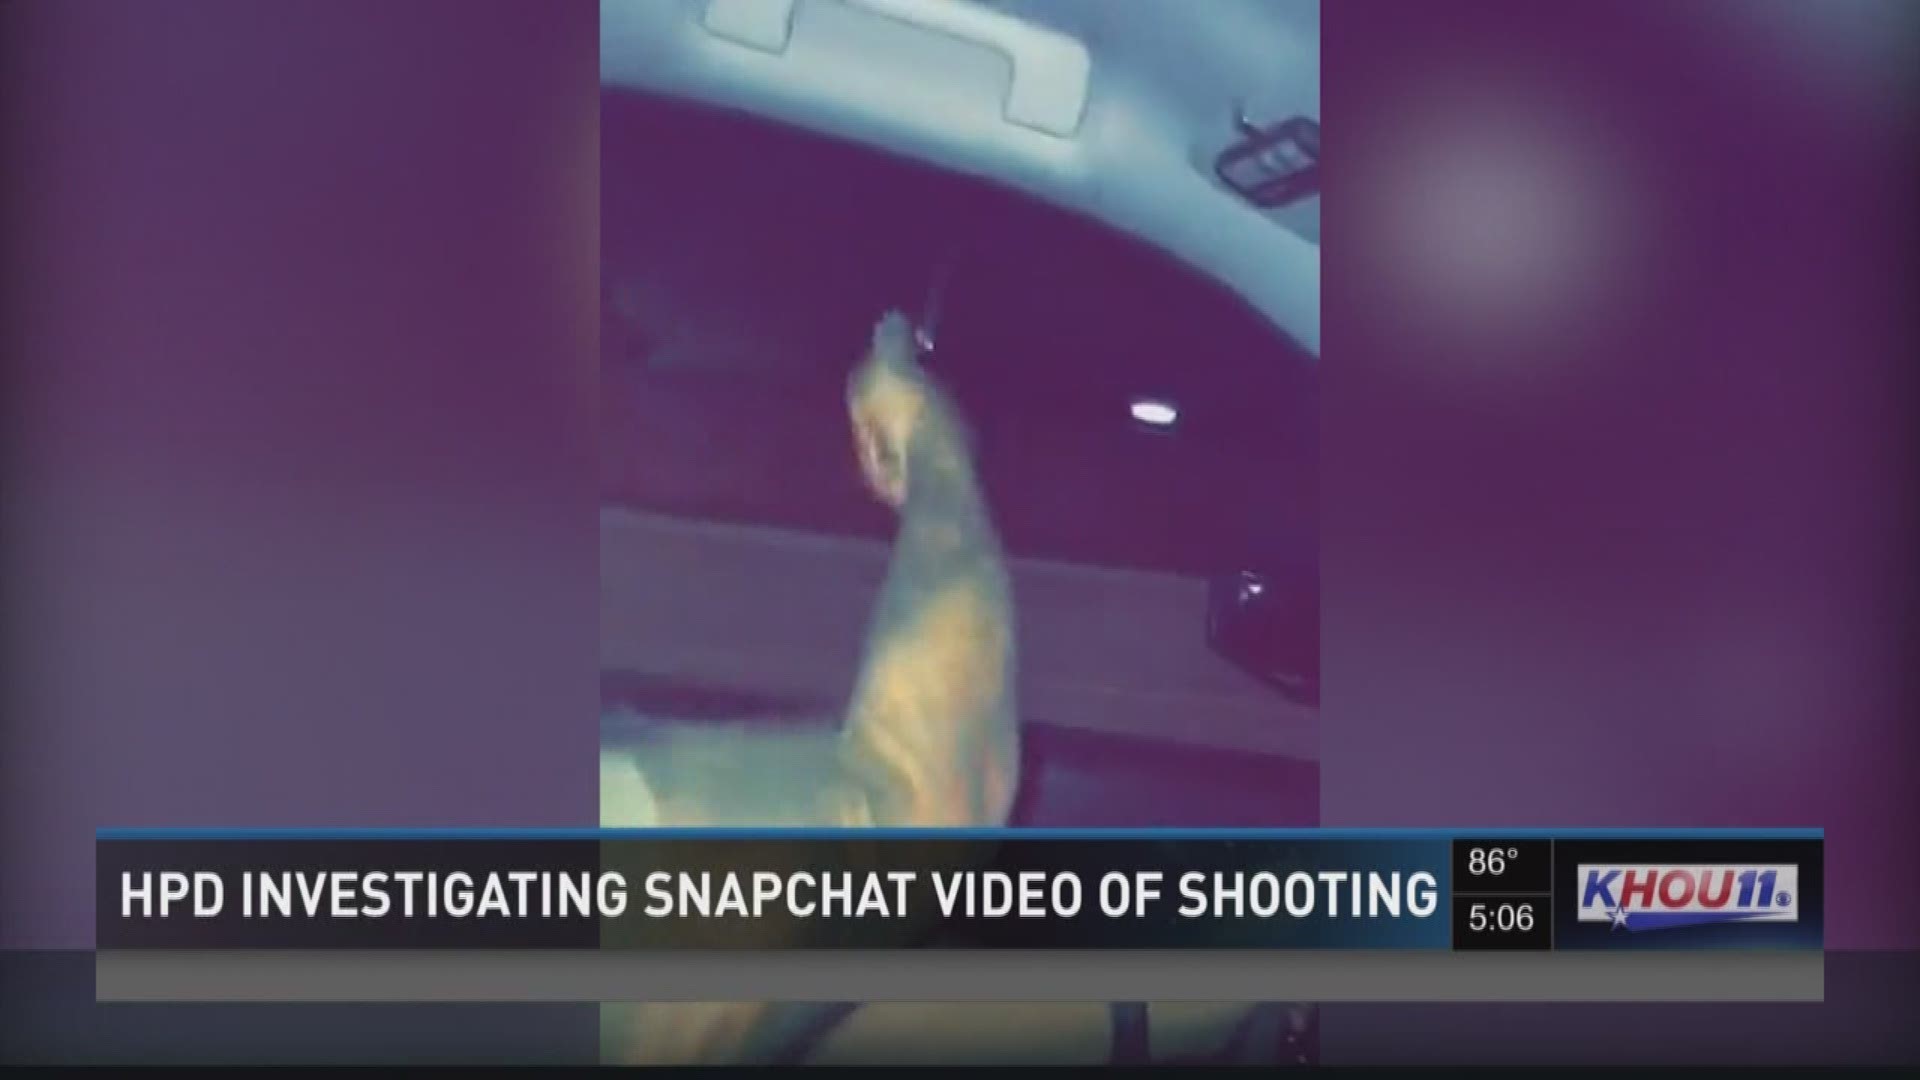 The Houston Police Department confirmed Thursday it is "actively investigating" a viral video that shows two people shooting guns from a moving car. Residents first reached out to KHOU 11 early Tuesday morning with concerns over three Snapchat videos post